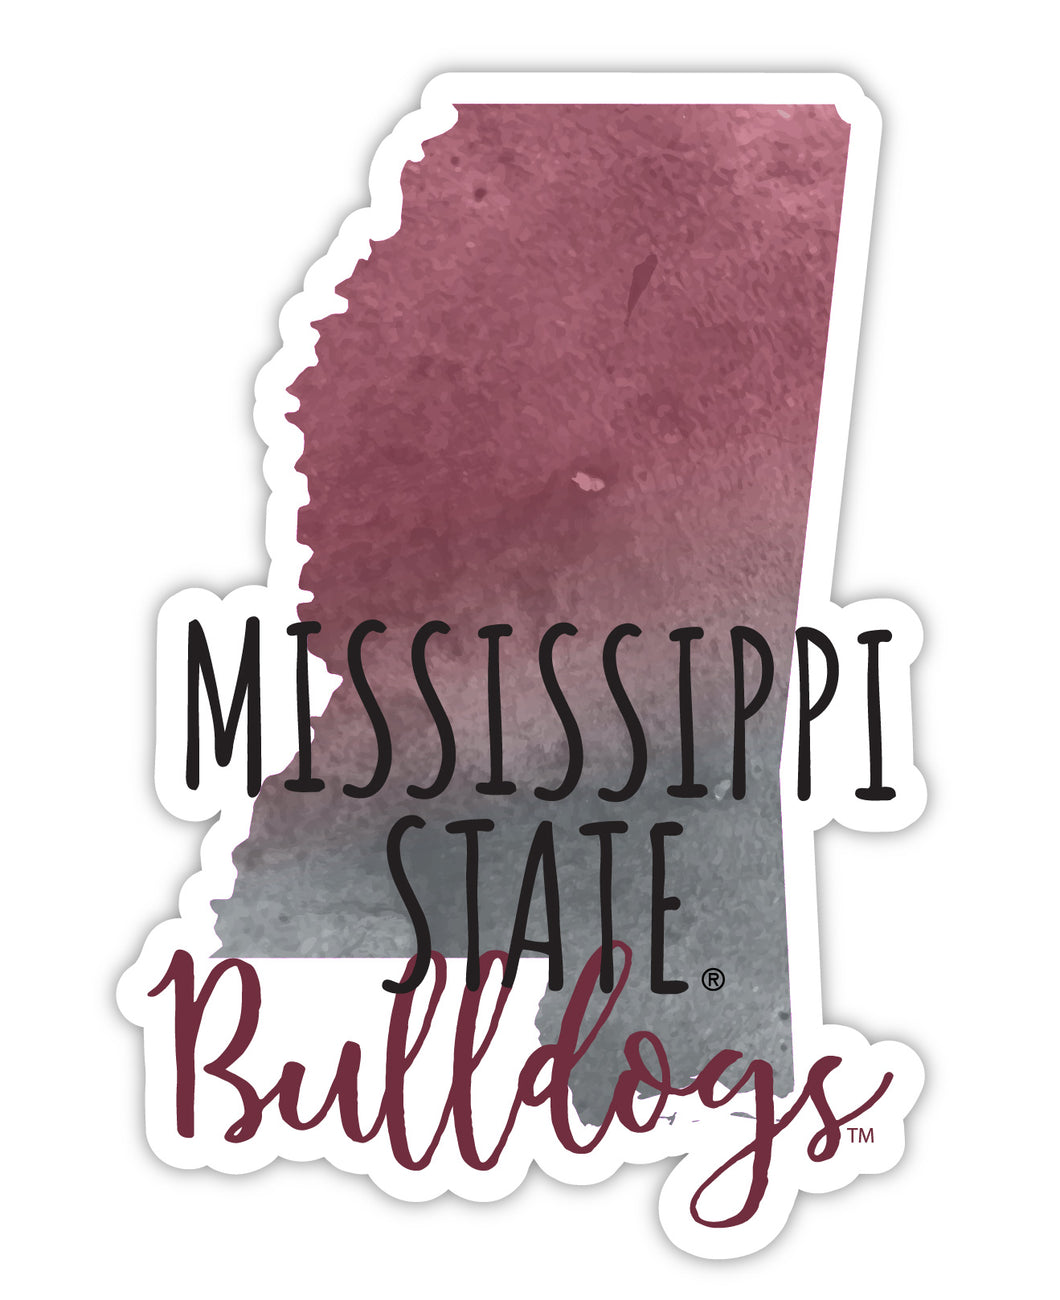 Mississippi State Bulldogs 2-Inch on one of its sides Watercolor Design NCAA Durable School Spirit Vinyl Decal Sticker